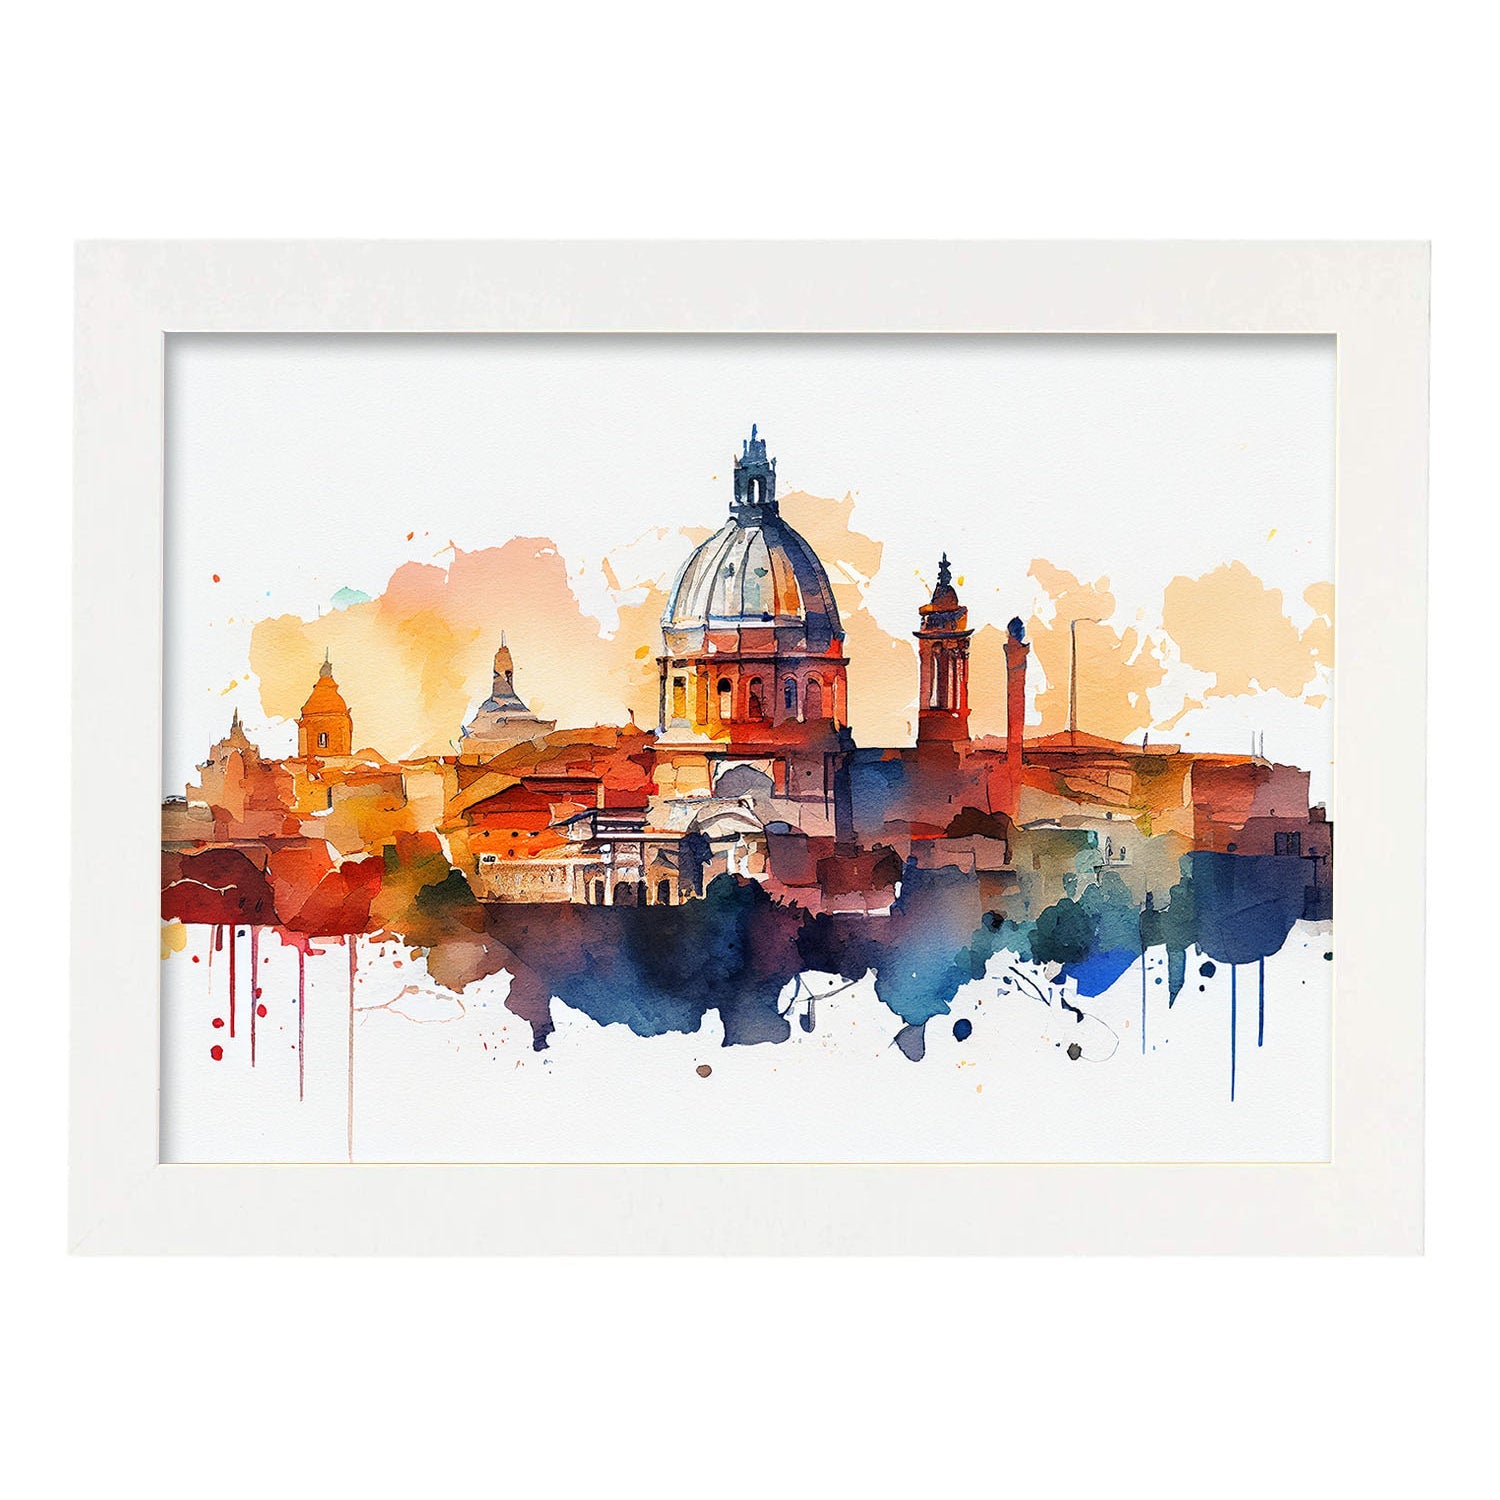 Nacnic watercolor of a skyline of the city of Rome_1. Aesthetic Wall Art Prints for Bedroom or Living Room Design.-Artwork-Nacnic-A4-Marco Blanco-Nacnic Estudio SL